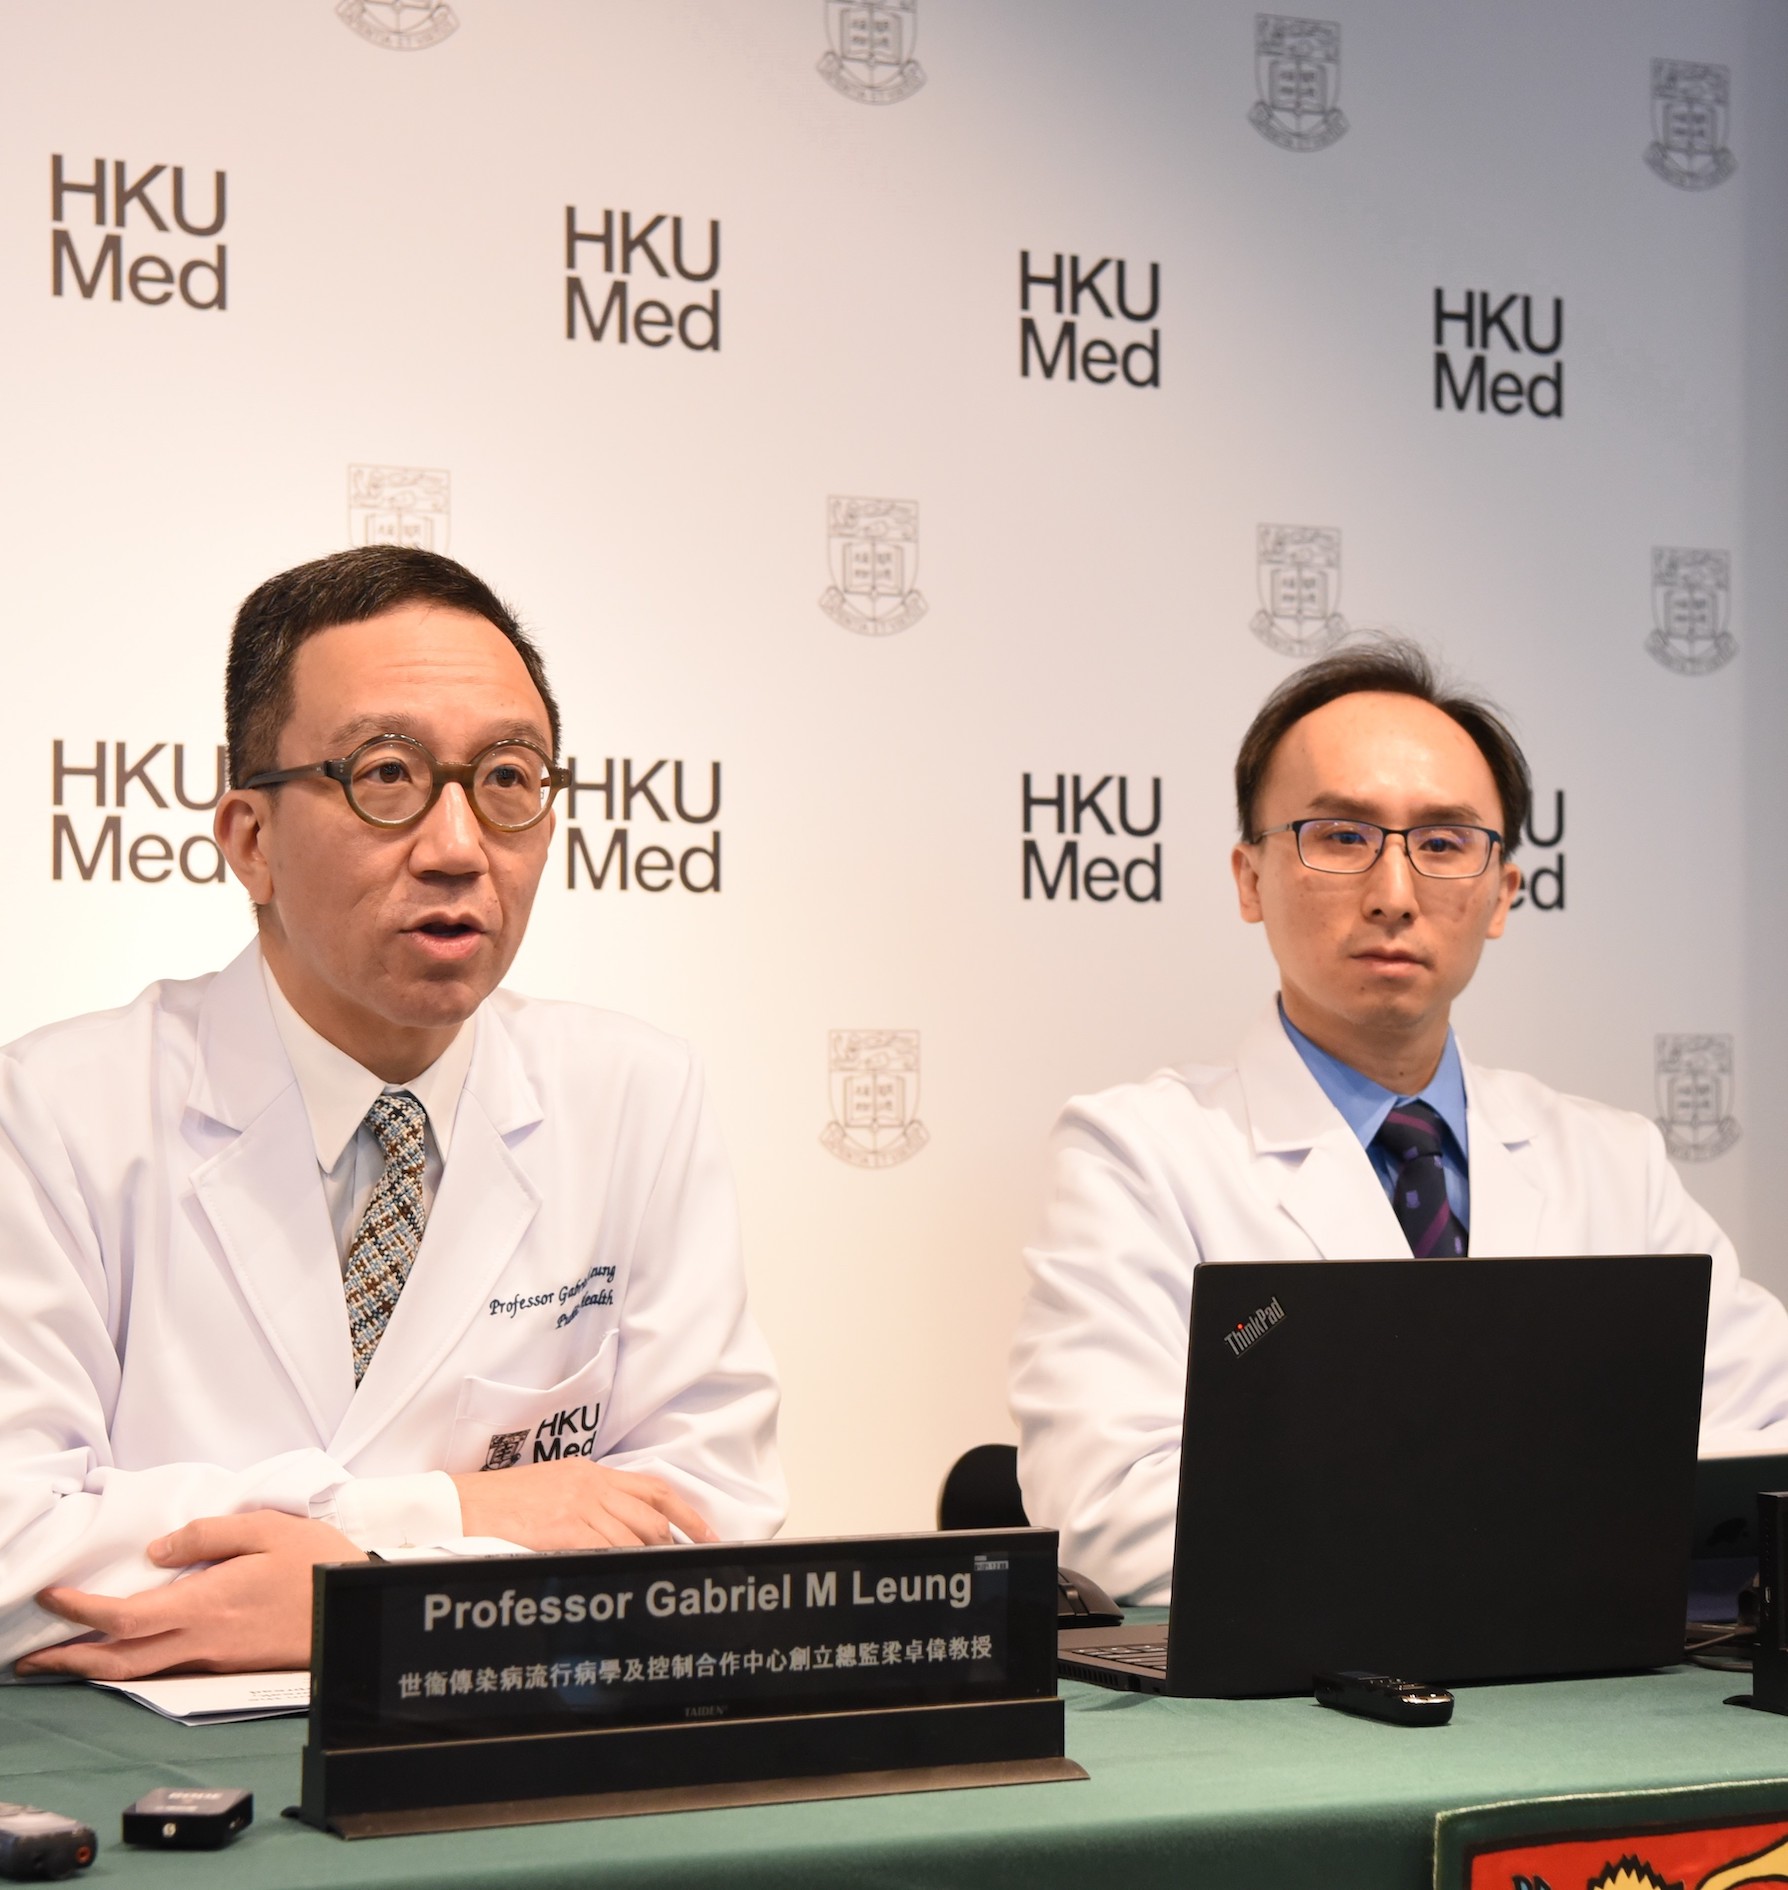 Professor Gabriel Leung, Chair Professor of Public Health Medicine, HKUMed, and Founding Director of the WHO Collaborating Centre for Infectious Disease Epidemiology and Control (left) and Professor Joseph Wu, Professor, Division of Epidemiology and Biostatistics, School of Public Health, HKUMed (right) present real-time nowcast and forecast on the extent of the Wuhan CoV outbreak, domestic and international spread.